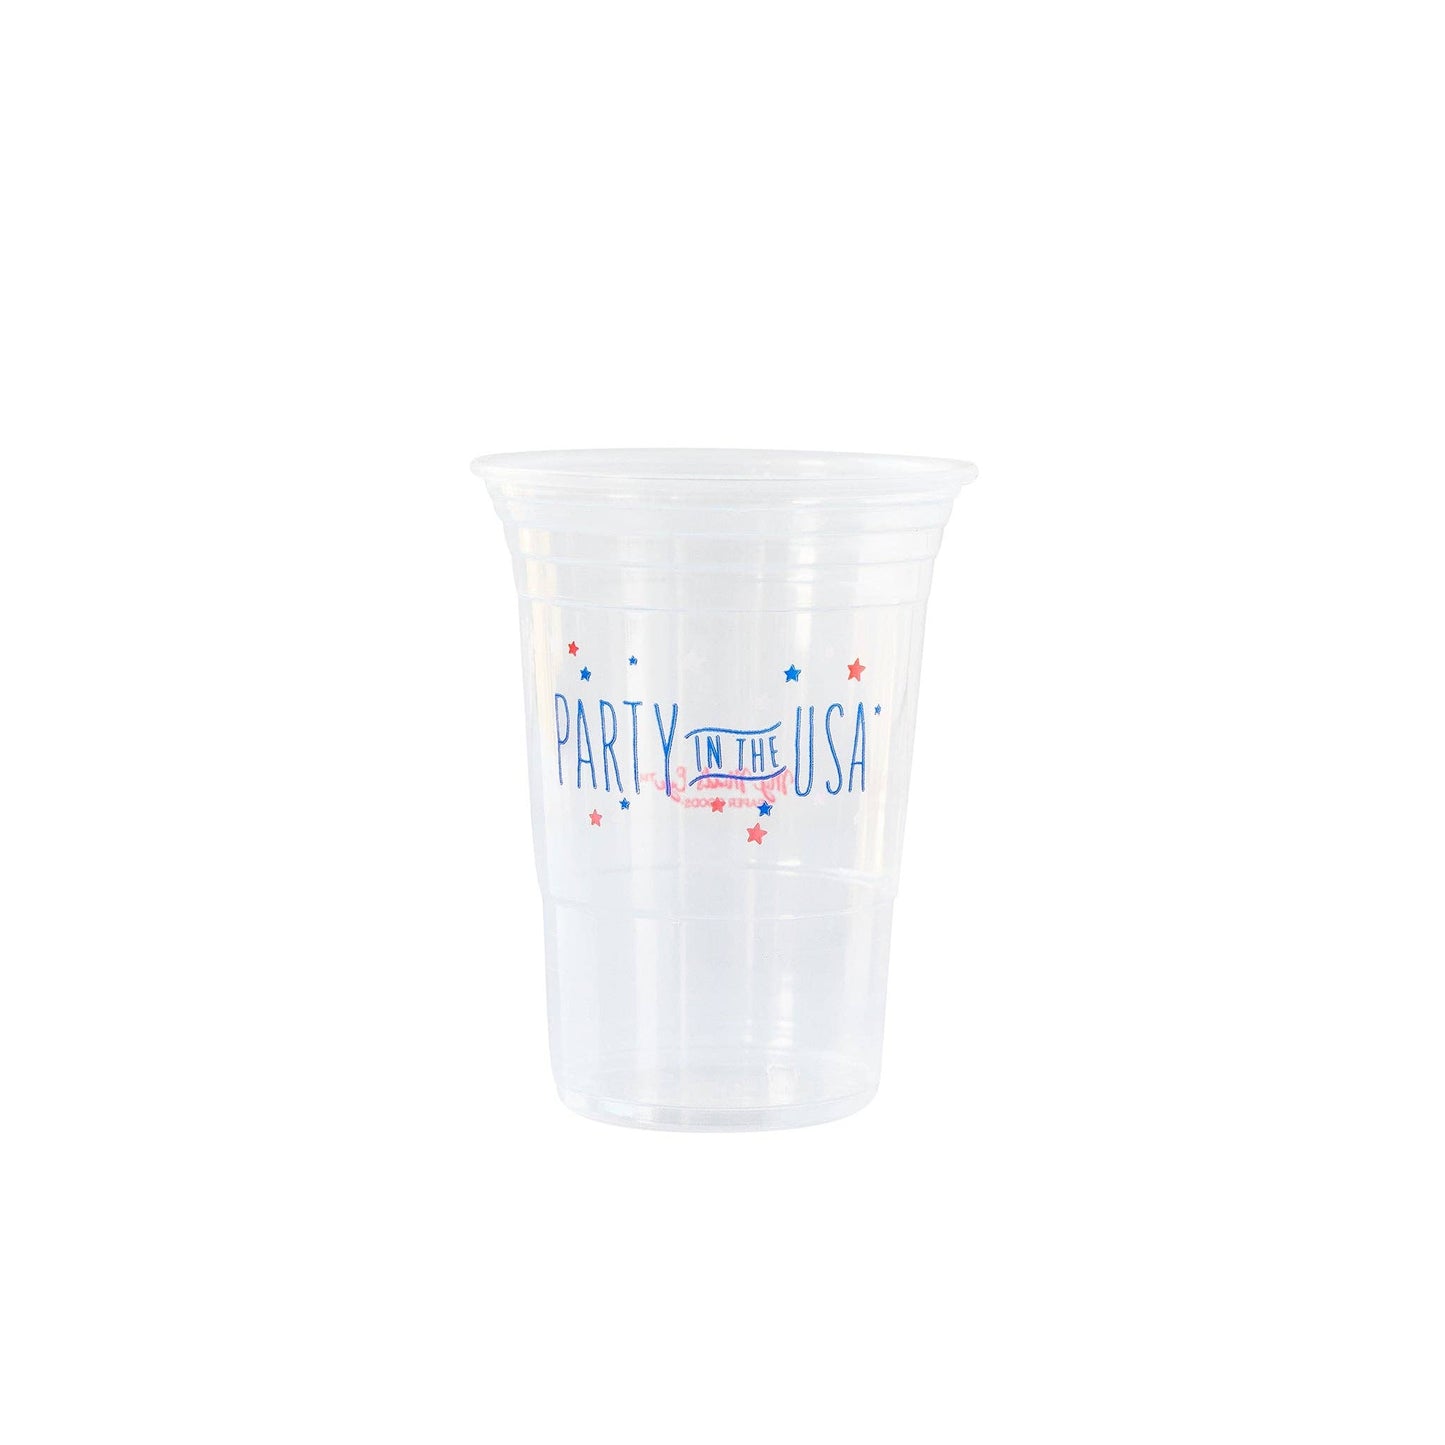 Party in the USA Plastic Party Cups (24 Count)